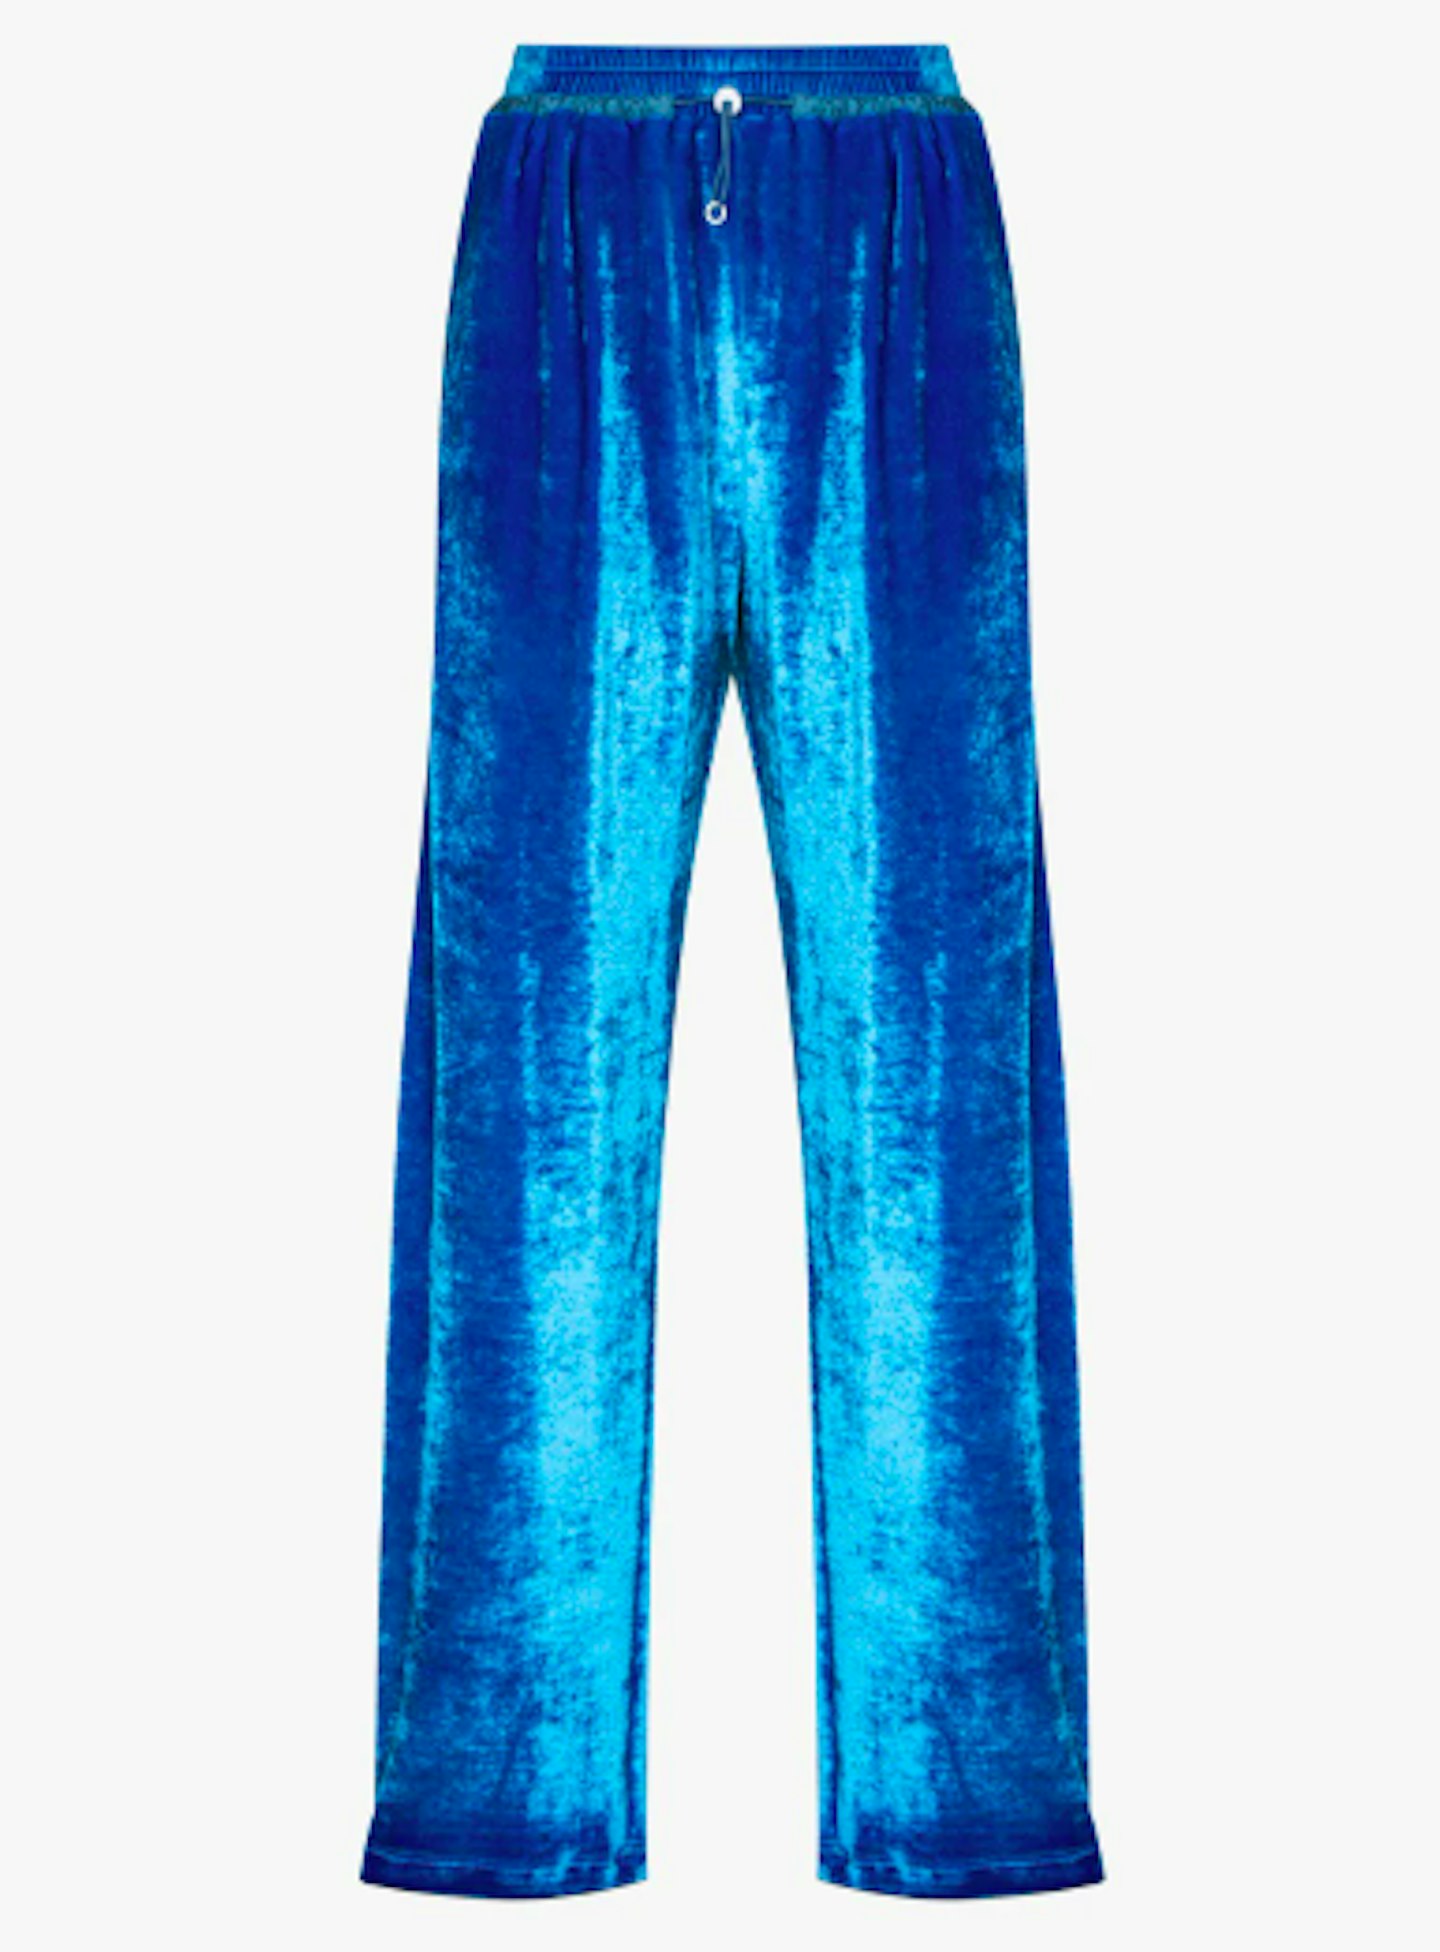 Off-White, High Waist Track Pants, £495 at Browns